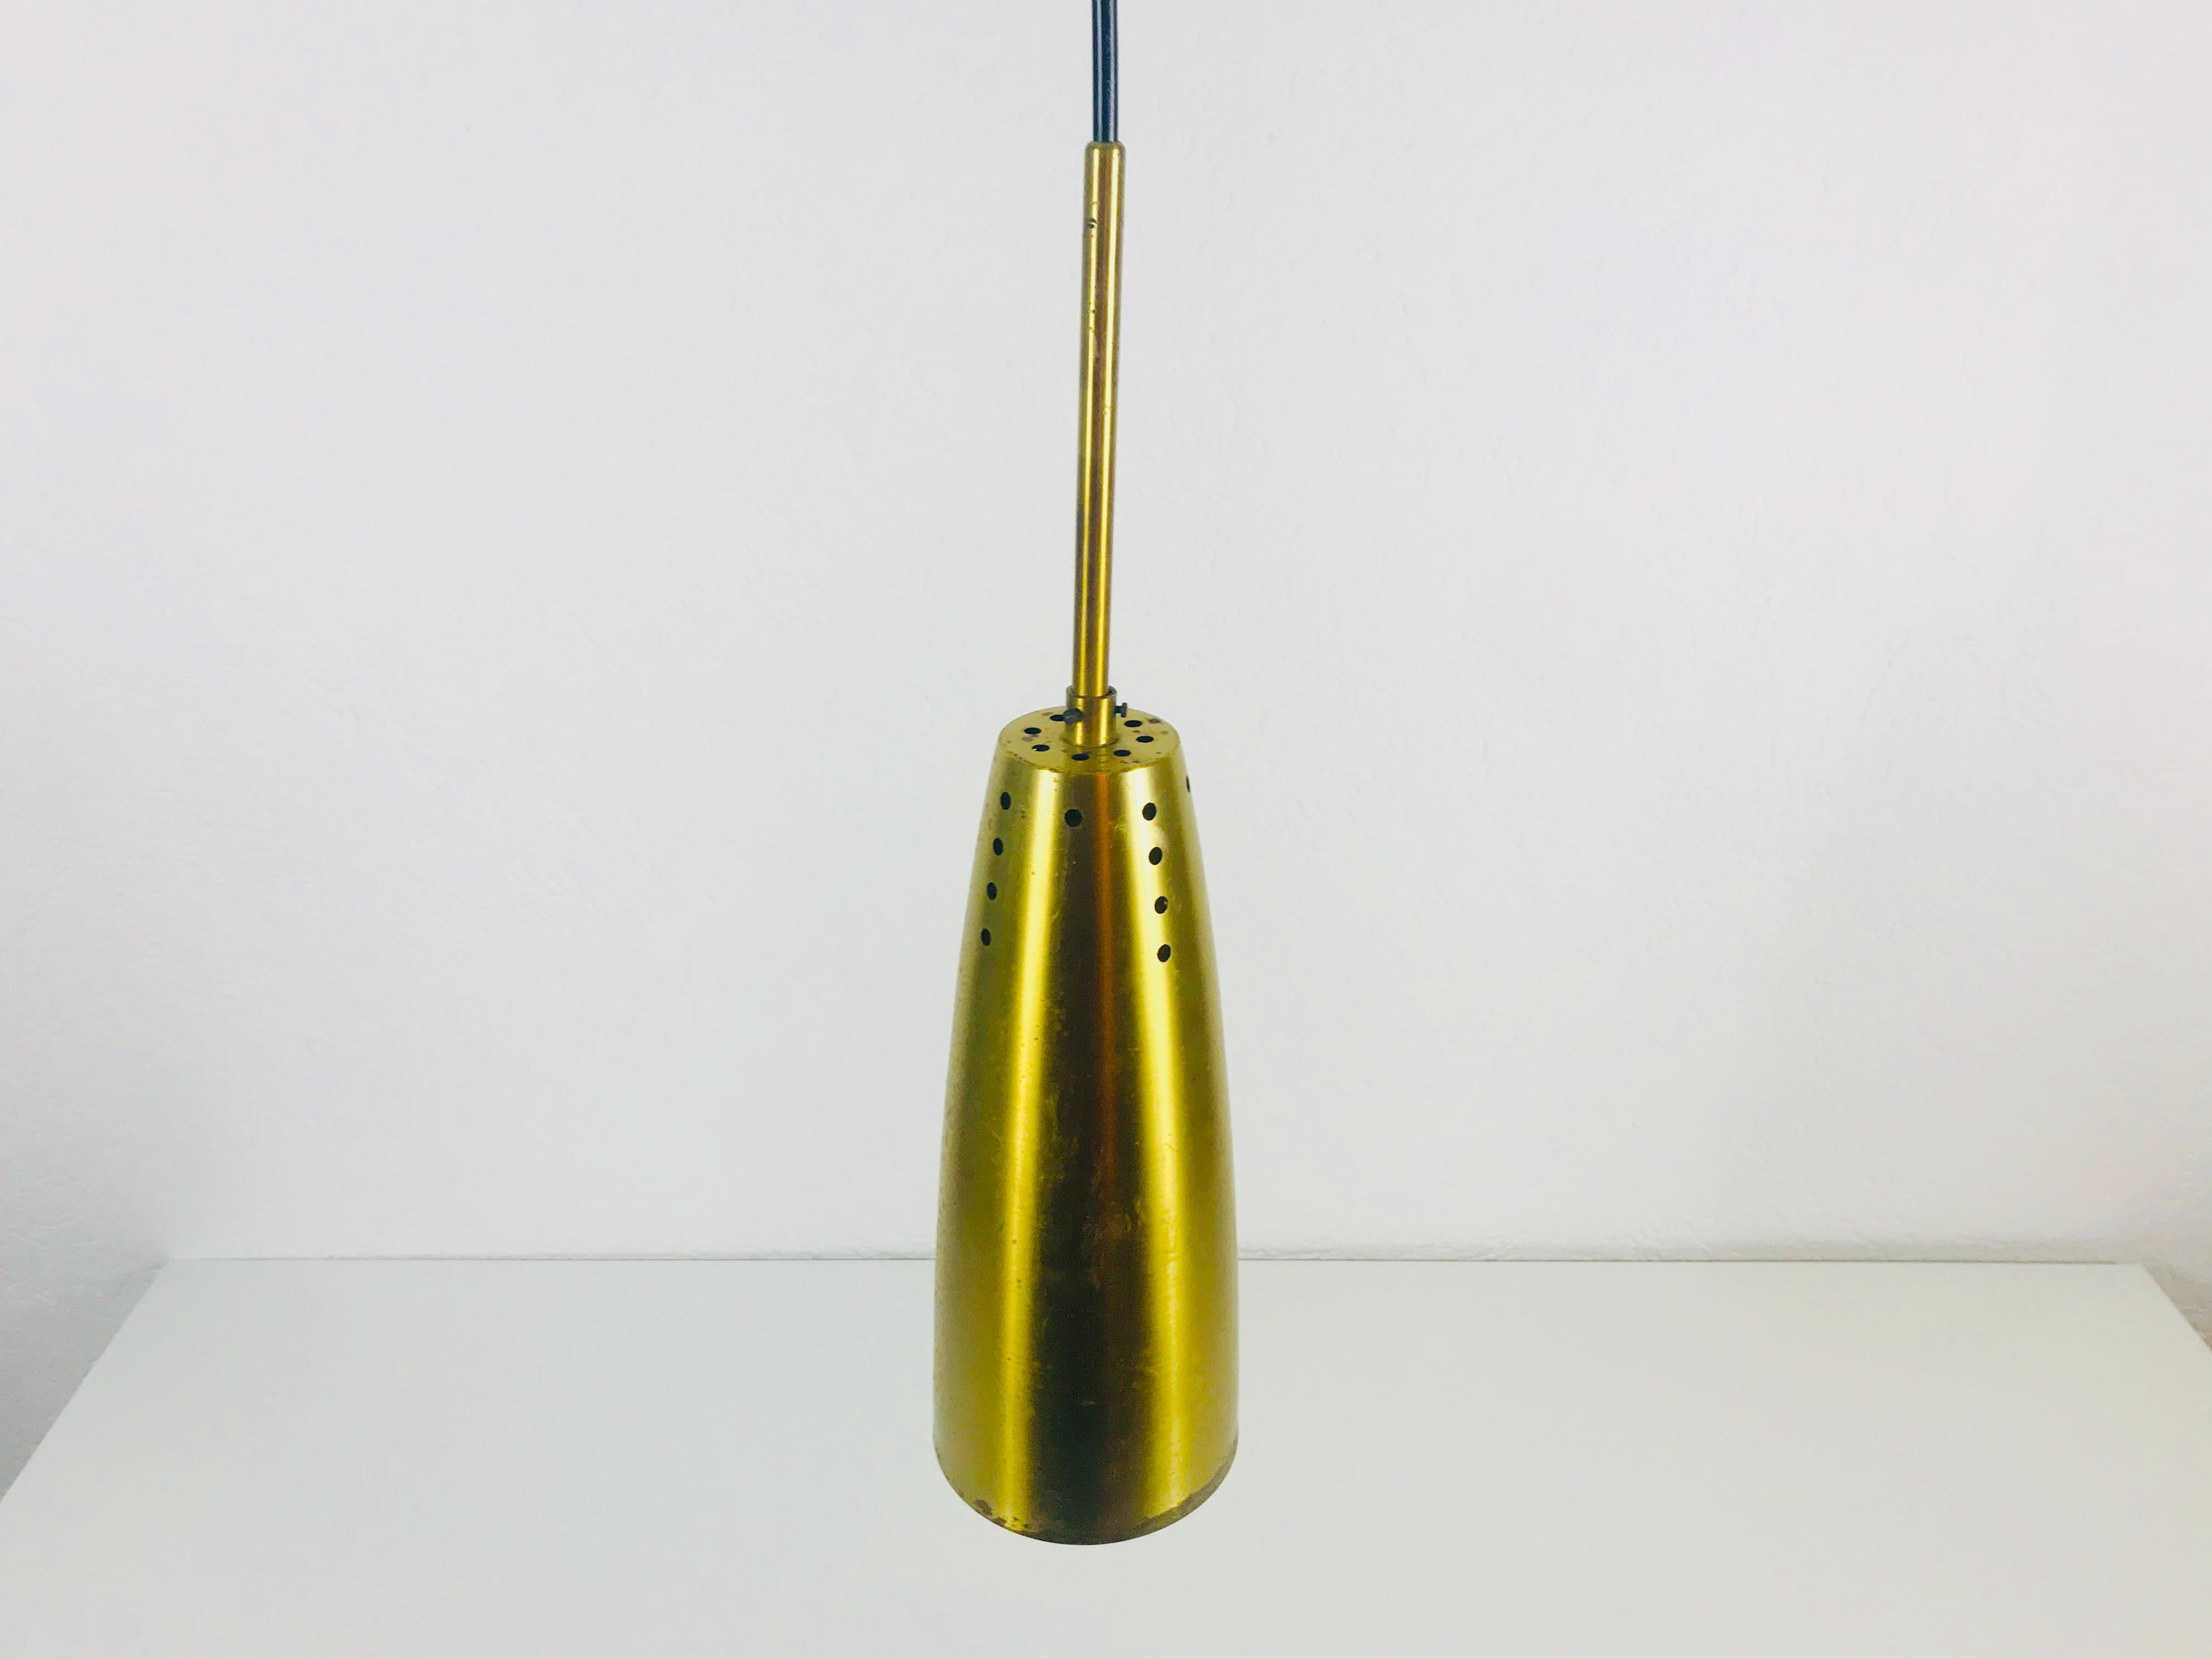 Pair of Full Brass Mid-Century Modern Pendant Lamps, 1950s, Germany For Sale 4